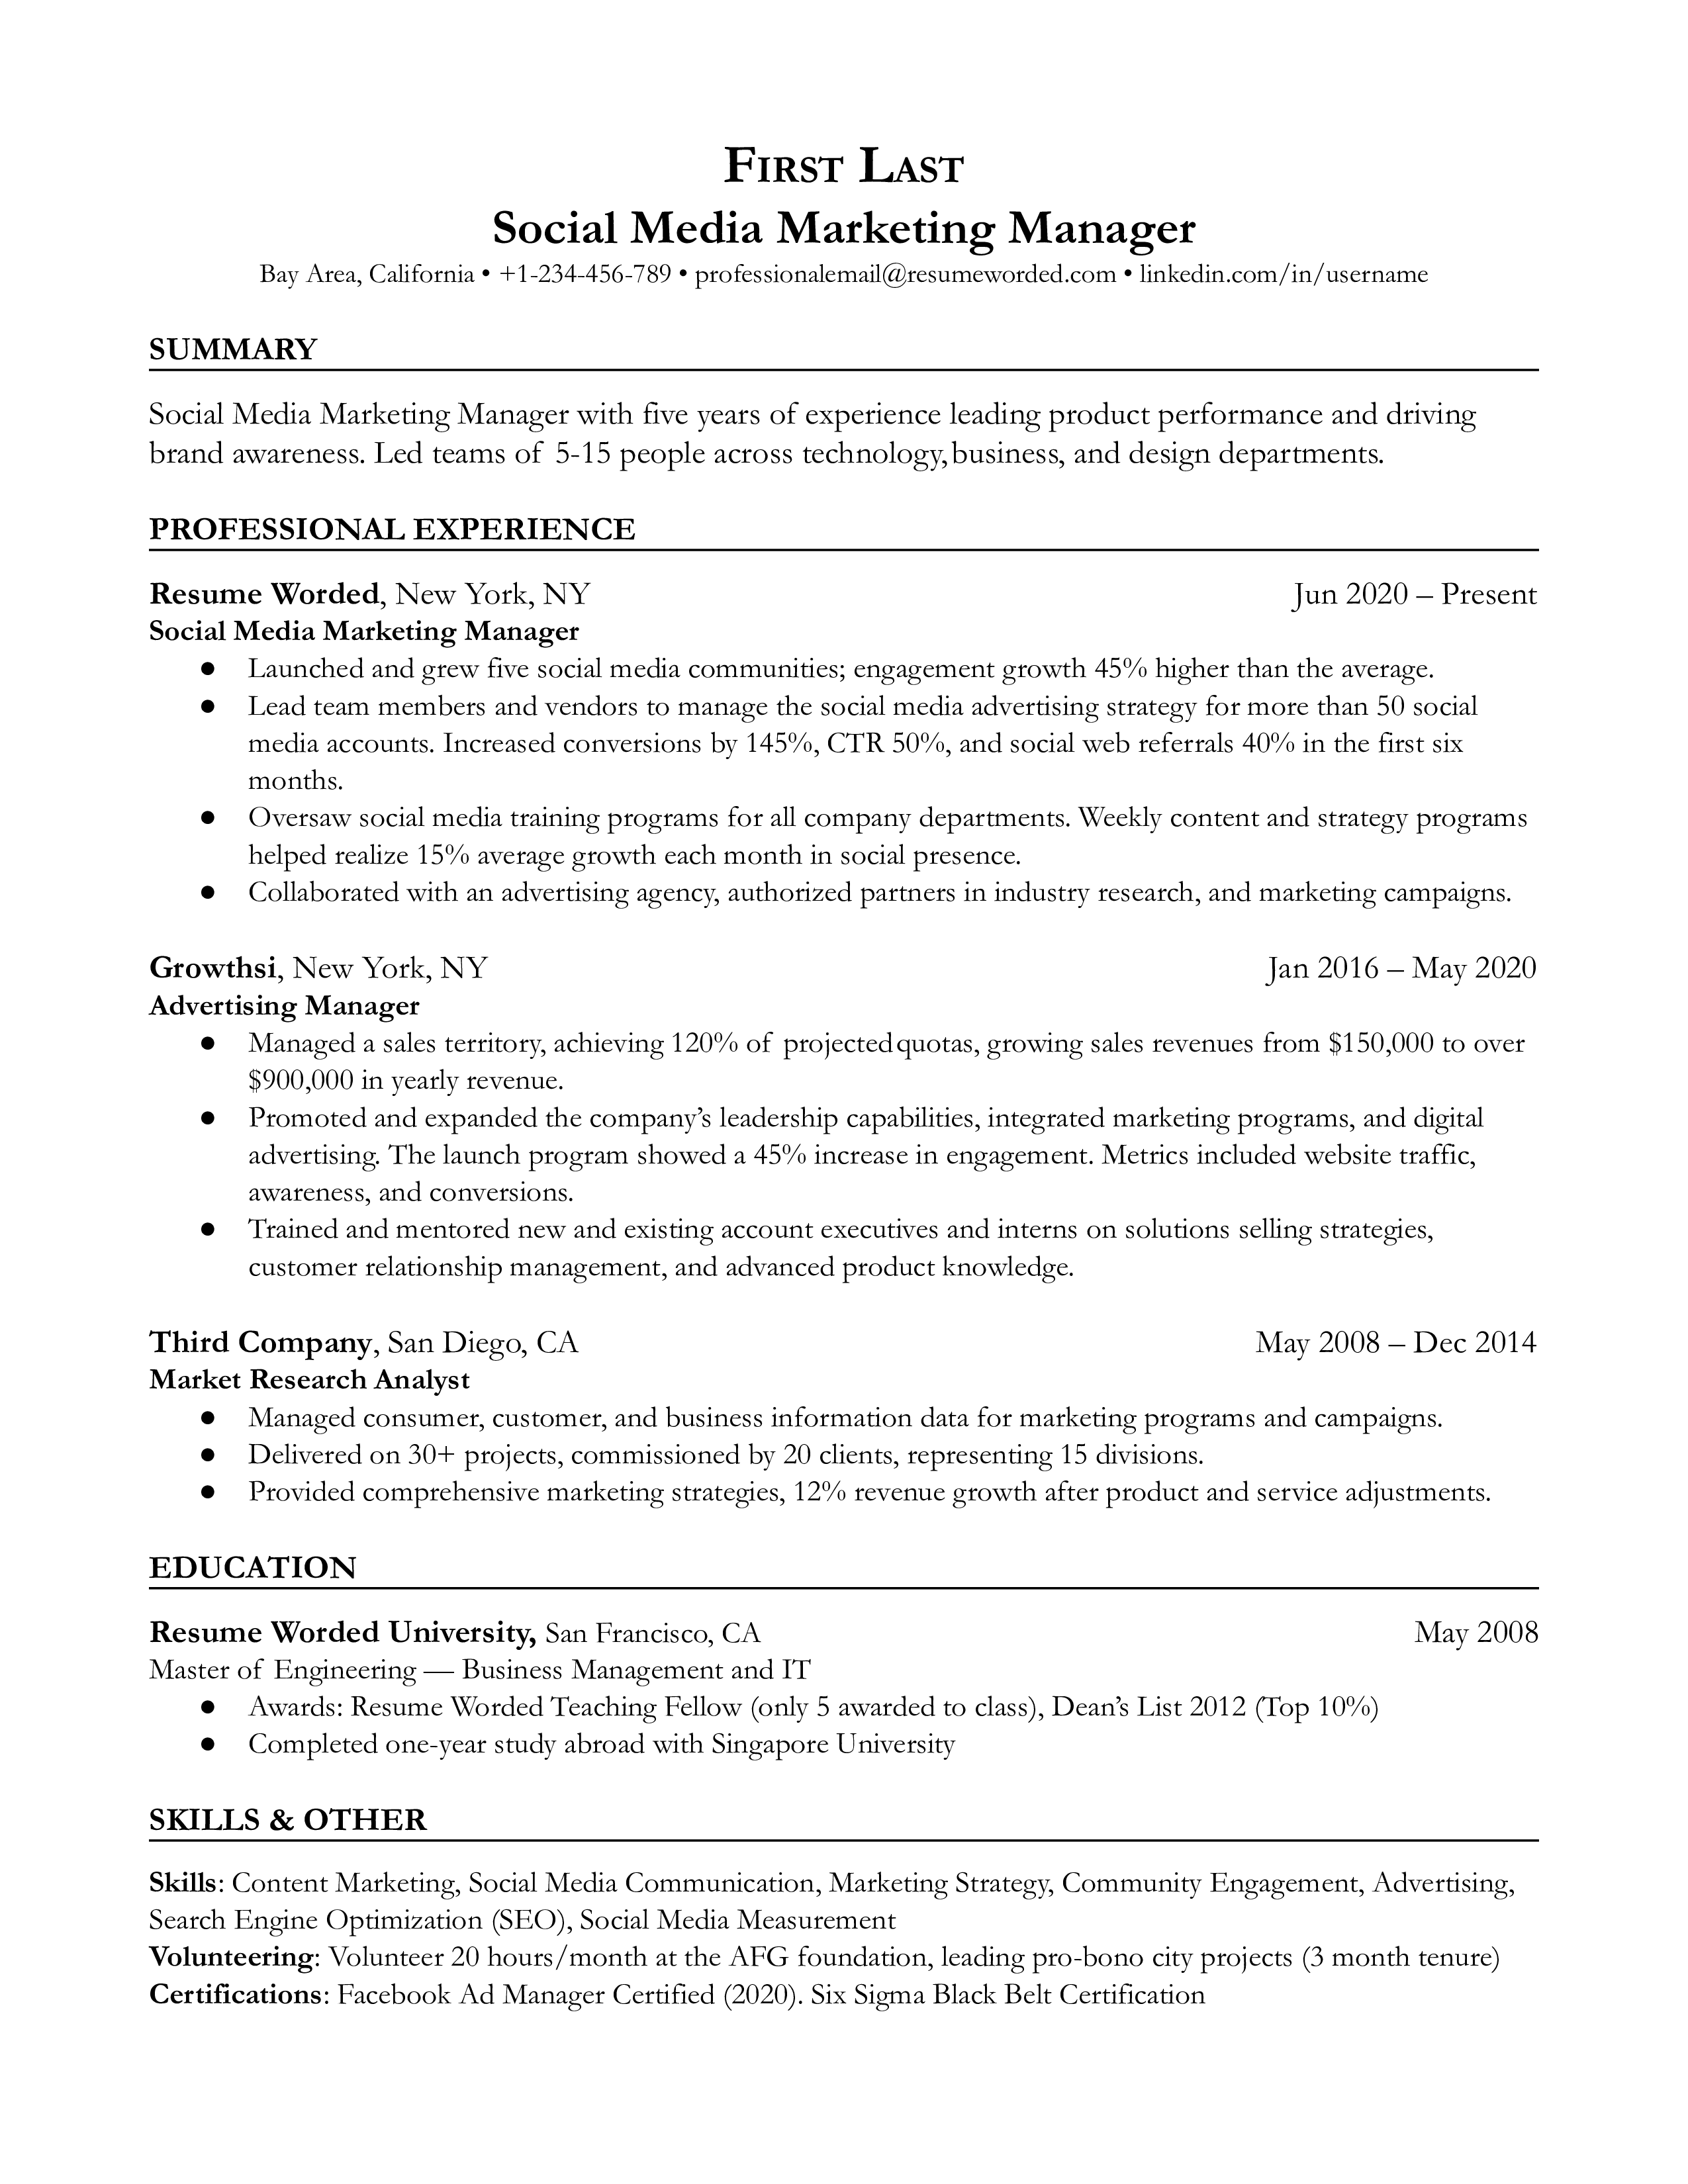 Social Media Marketing Manager Resume Template + Example